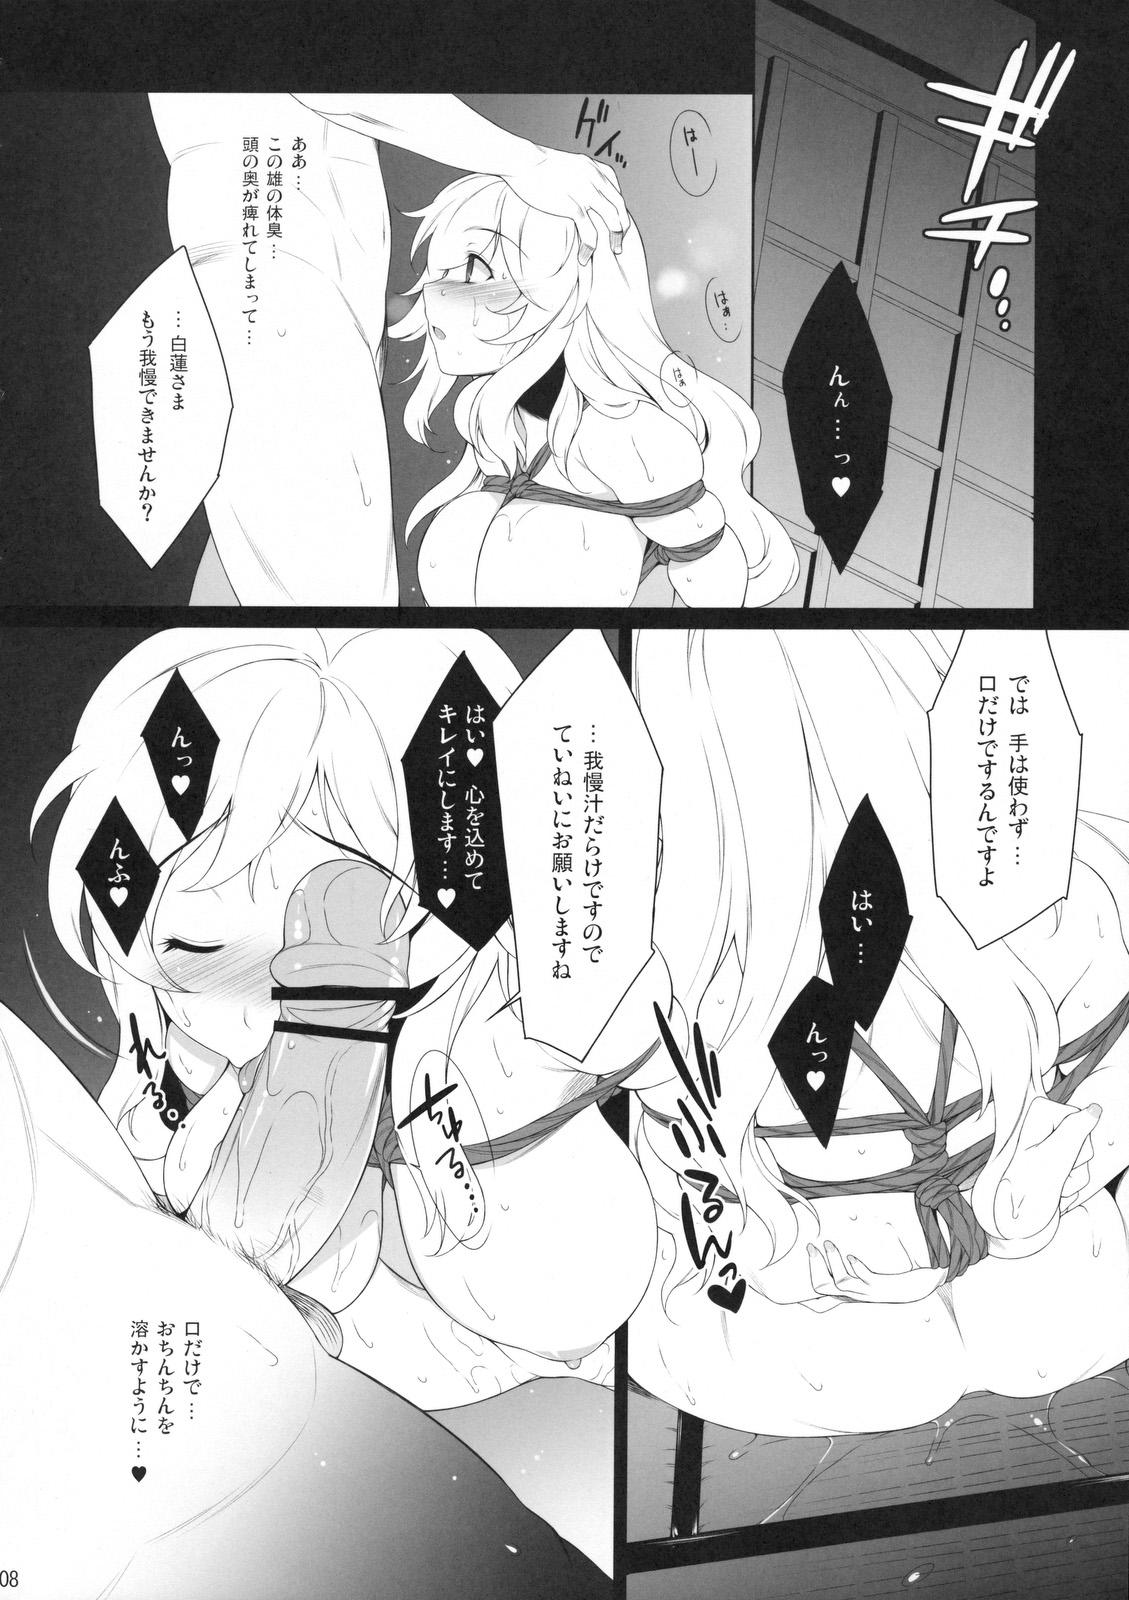 China A lot of kisses to you - Touhou project Bailando - Page 8